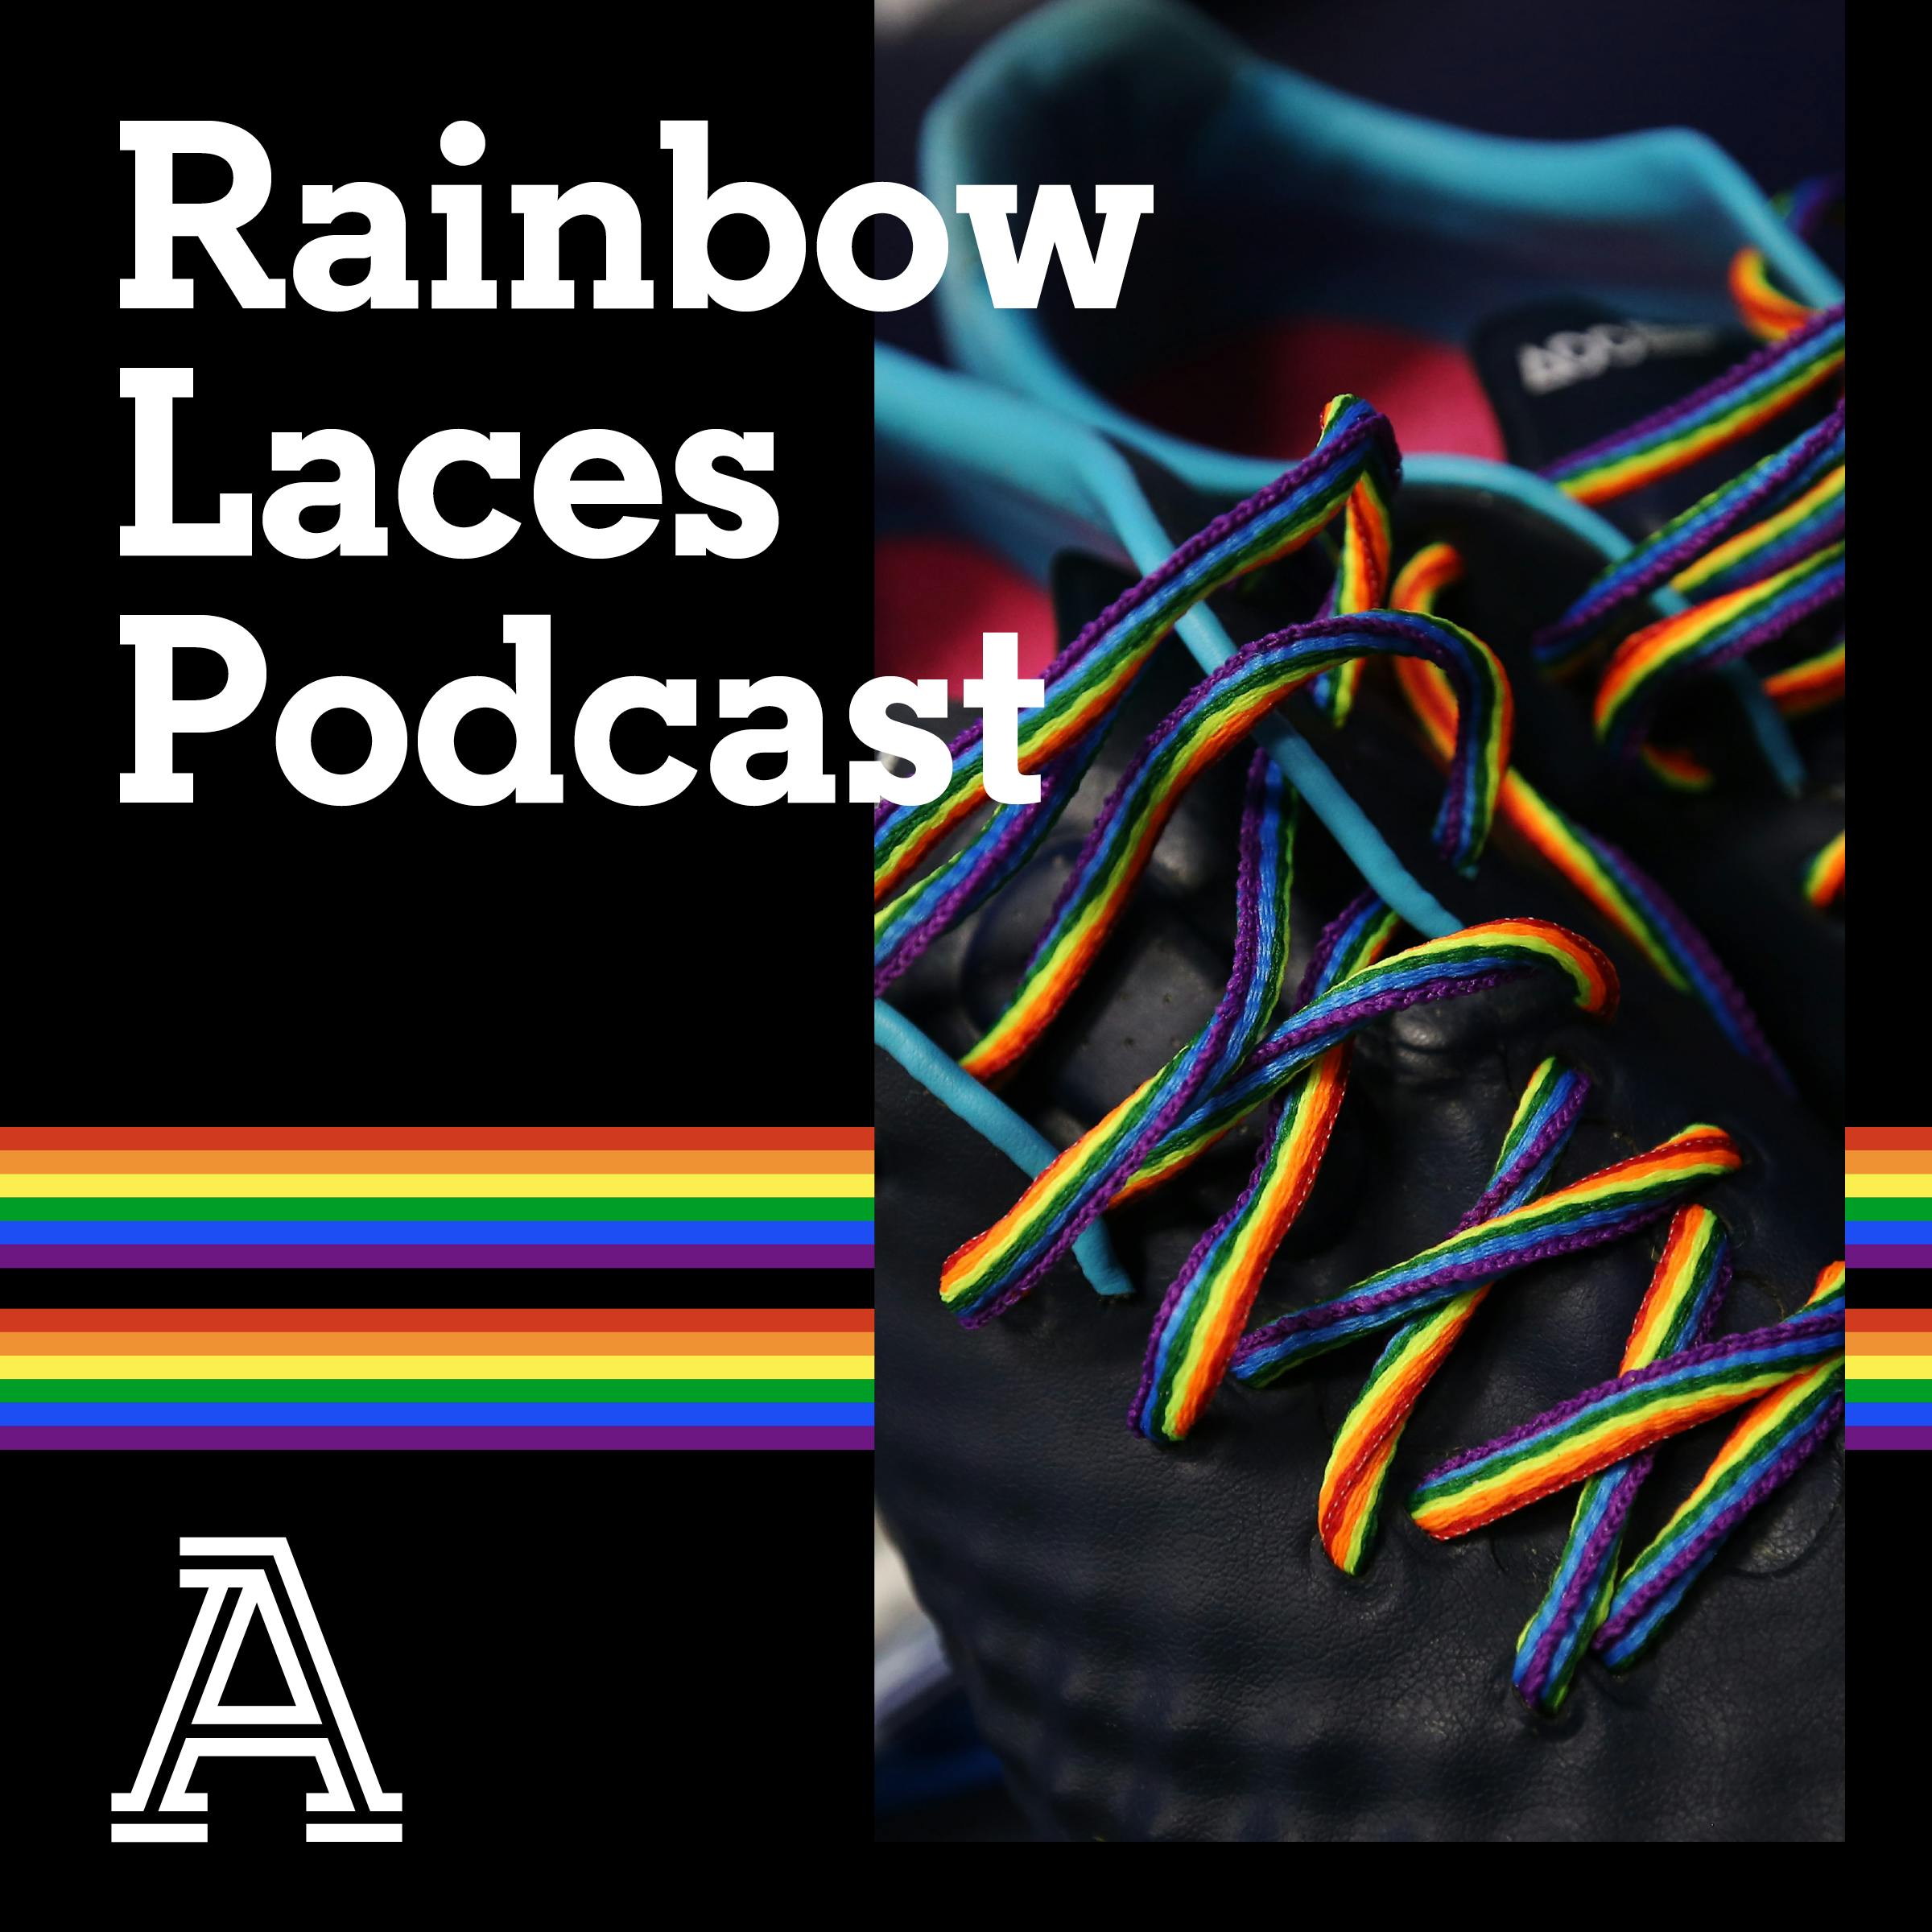 Rainbow Laces - A discussion about the challenges for the LGBT community in football